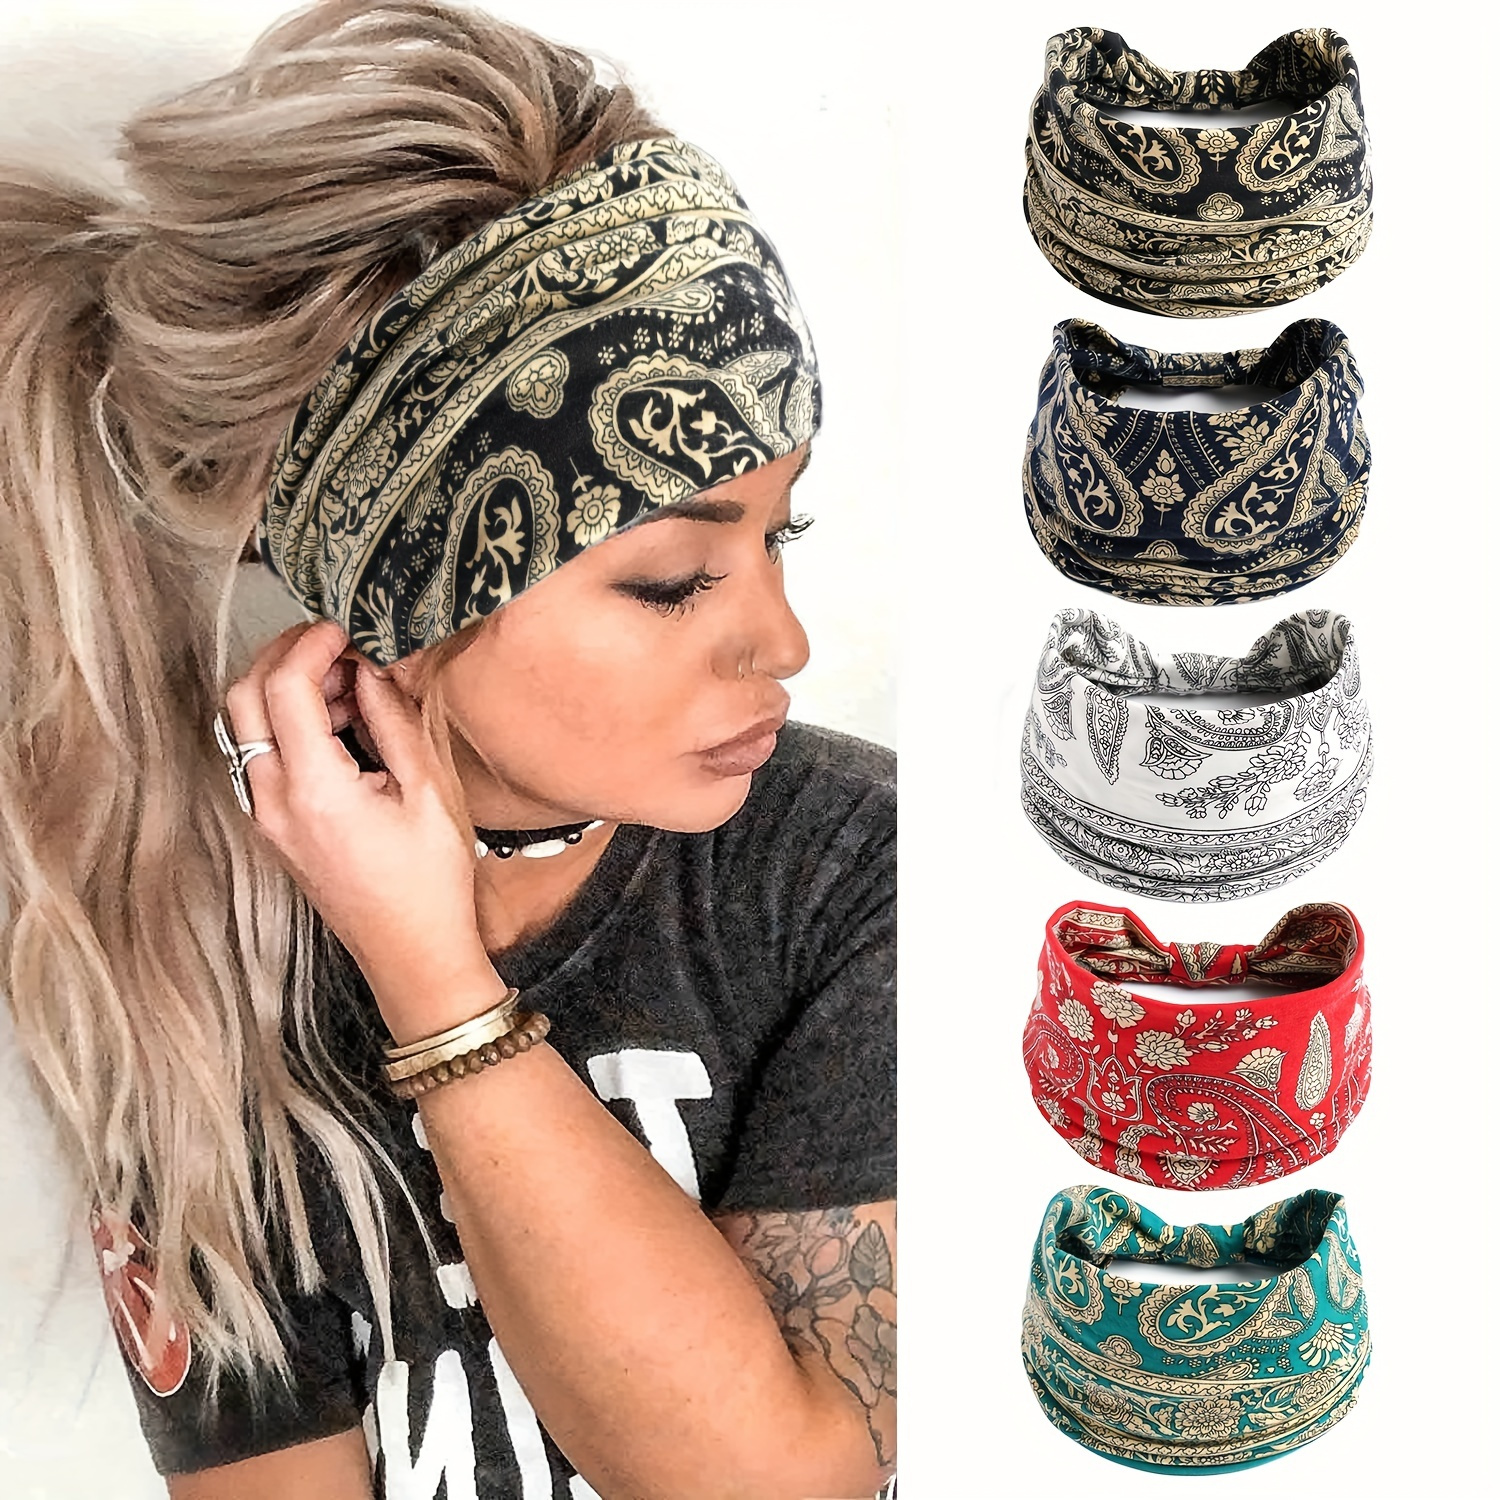 Retro Paisley Print Sporty Headband - Perfect For Yoga, Fitness, Running & Workout!